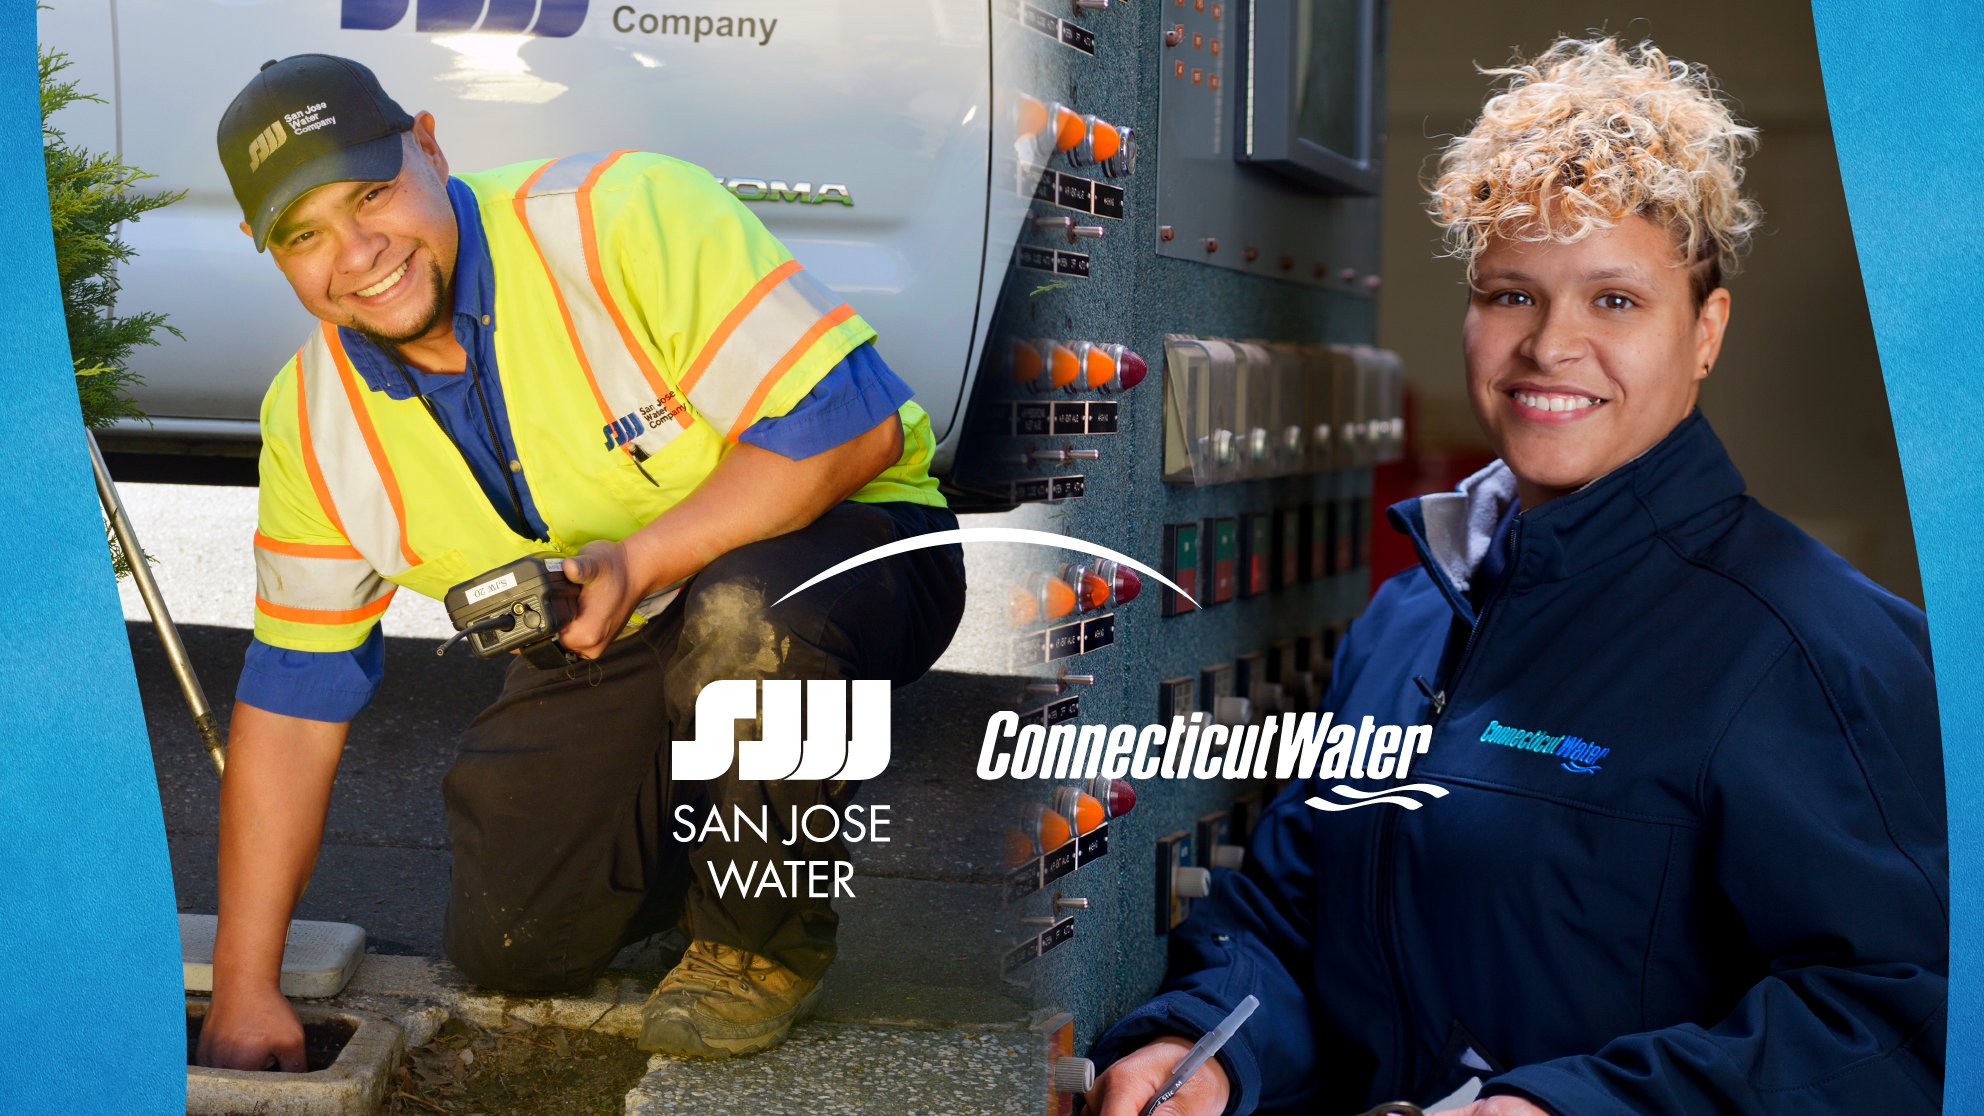 San Jose Water and Connecticut Water employees at work